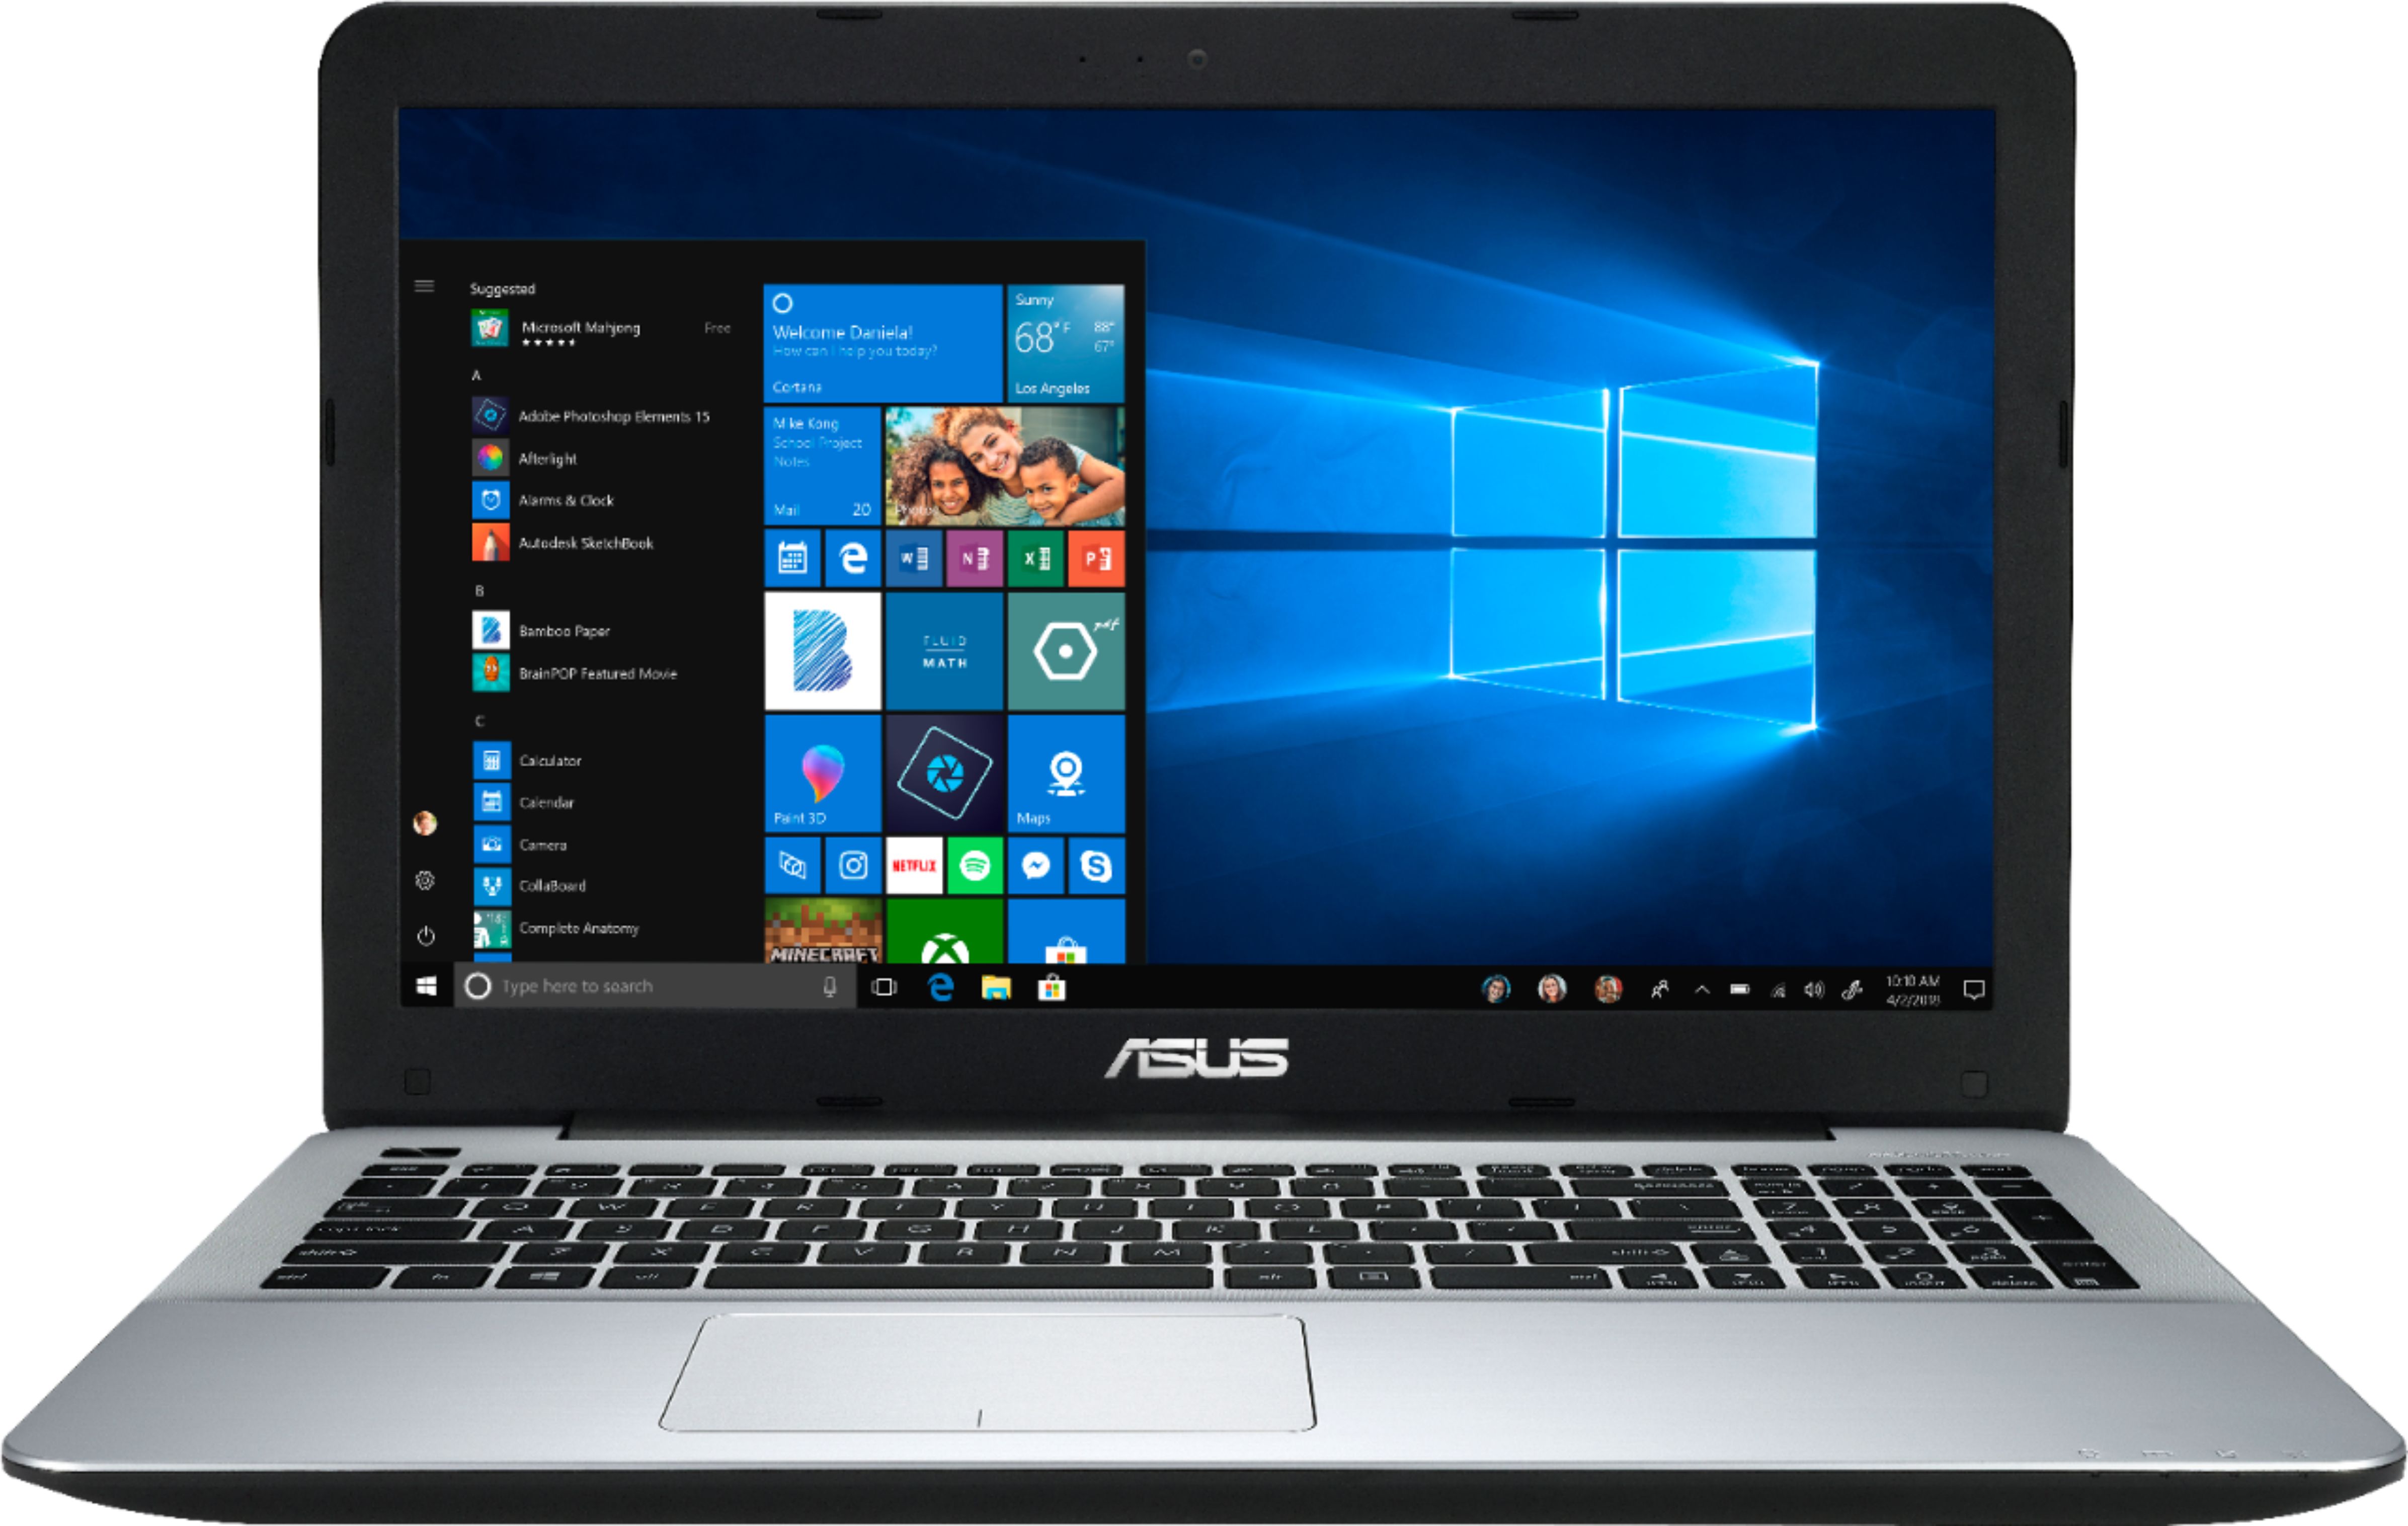 ASUS - 15.6" Laptop - AMD A12-Series - 8GB Memory - AMD Radeon R7 - 128GB Solid State Drive - Matte Silver IMR, Black IMR